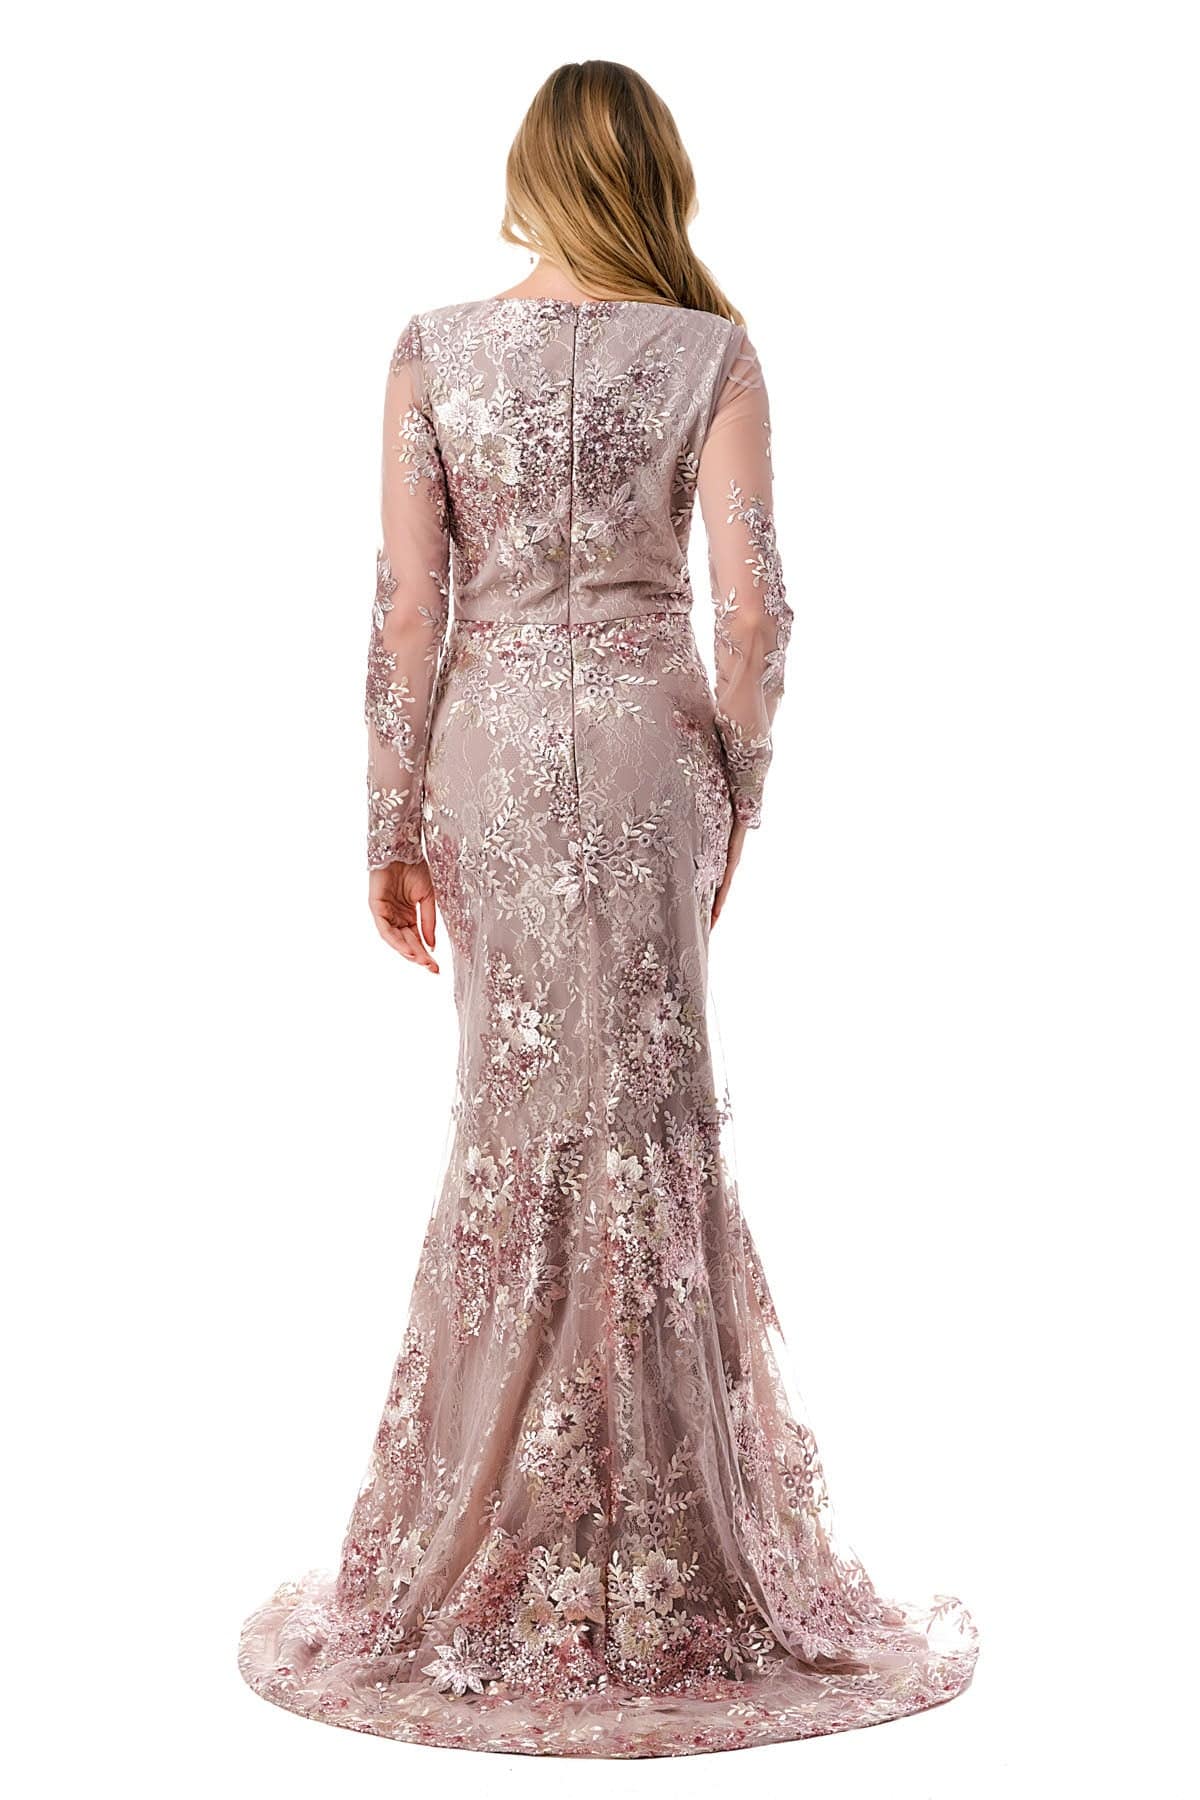 Aspeed M2768F Stunning Floral Lace Mermaid Dress - NORMA REED